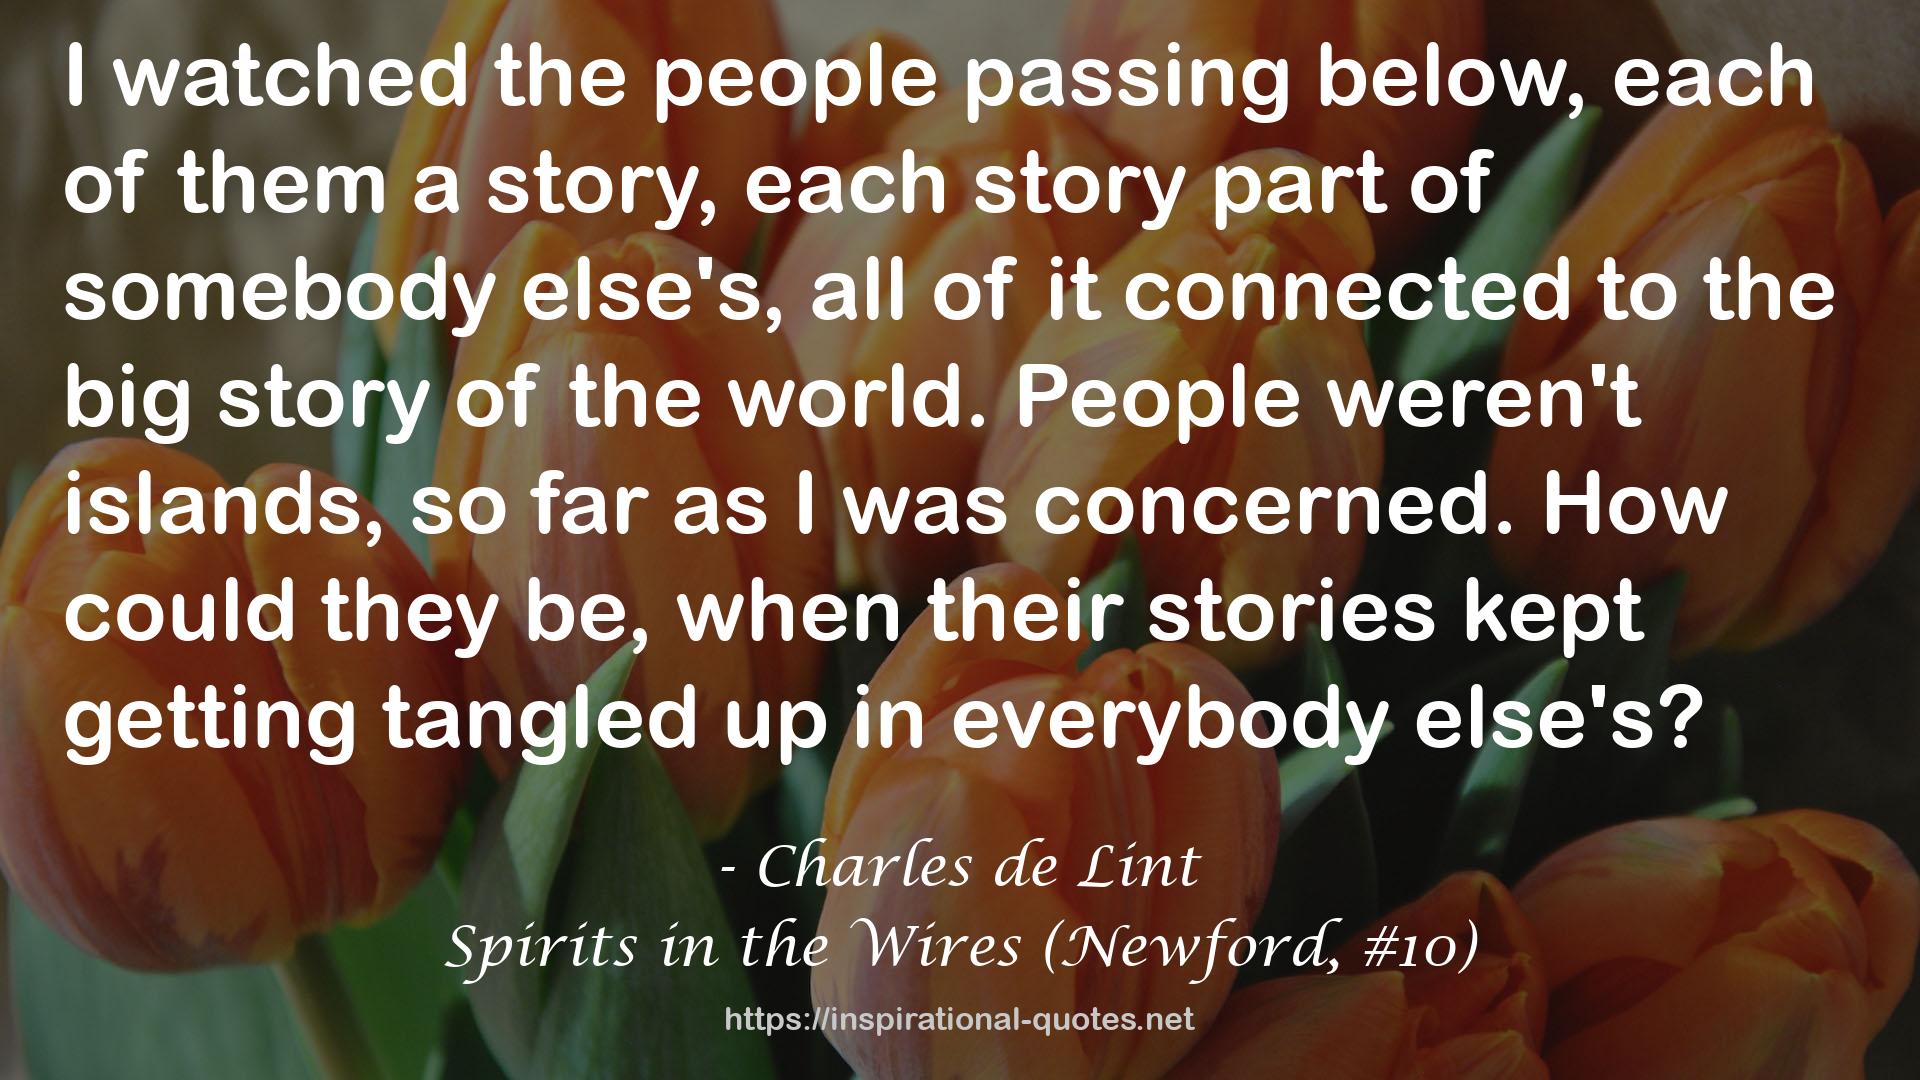 Spirits in the Wires (Newford, #10) QUOTES